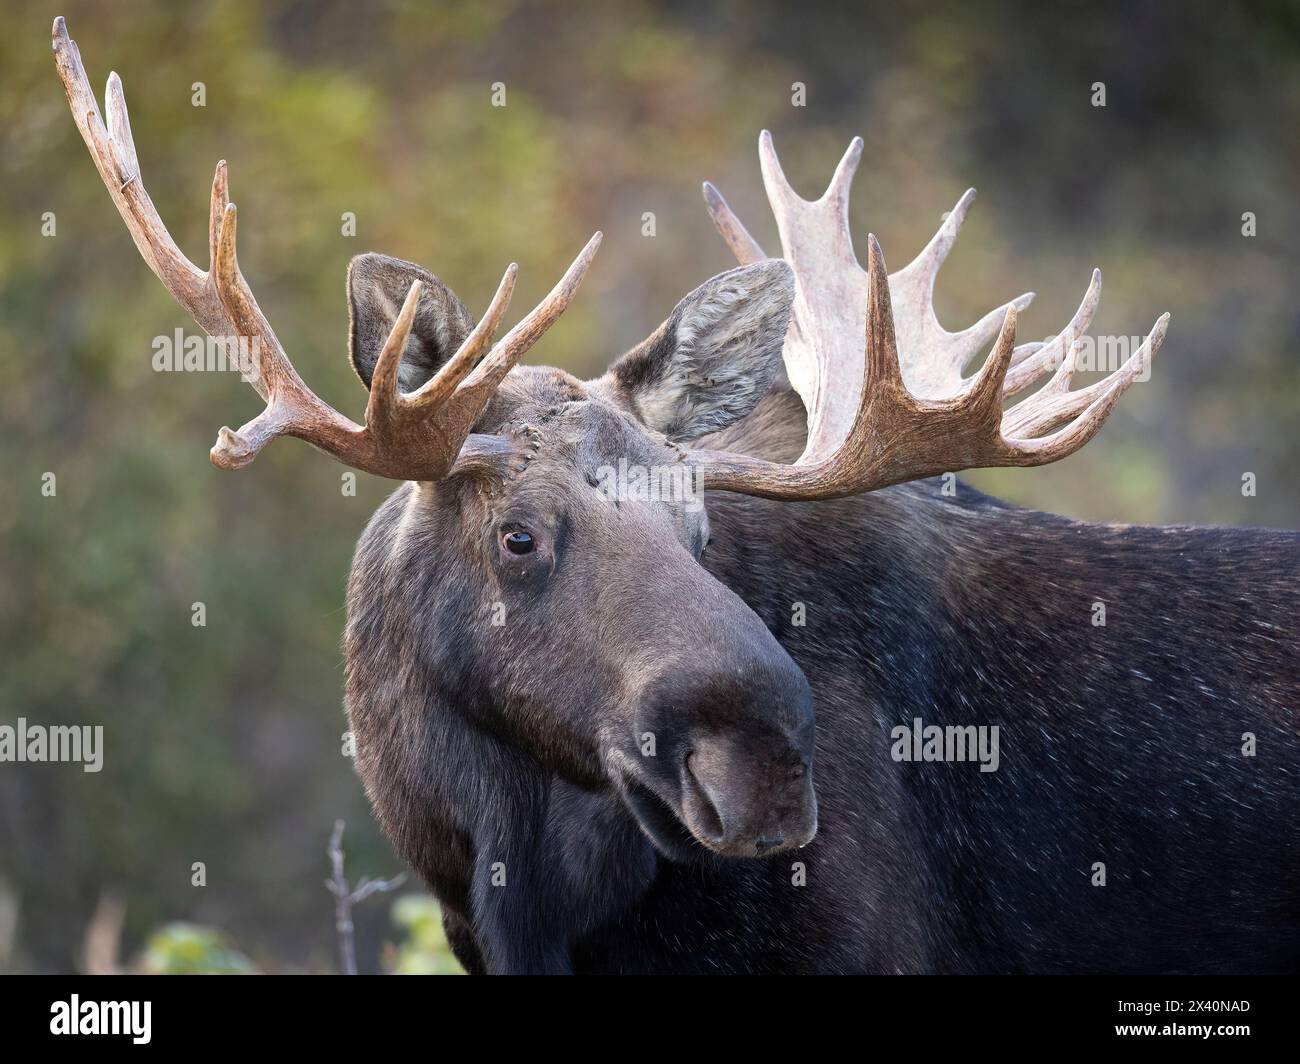 Backed by fall colors, an Alaska bull moose (Alces alces) surveys its surroundings on a cool September morning; Alaska, United States of America Stock Photo